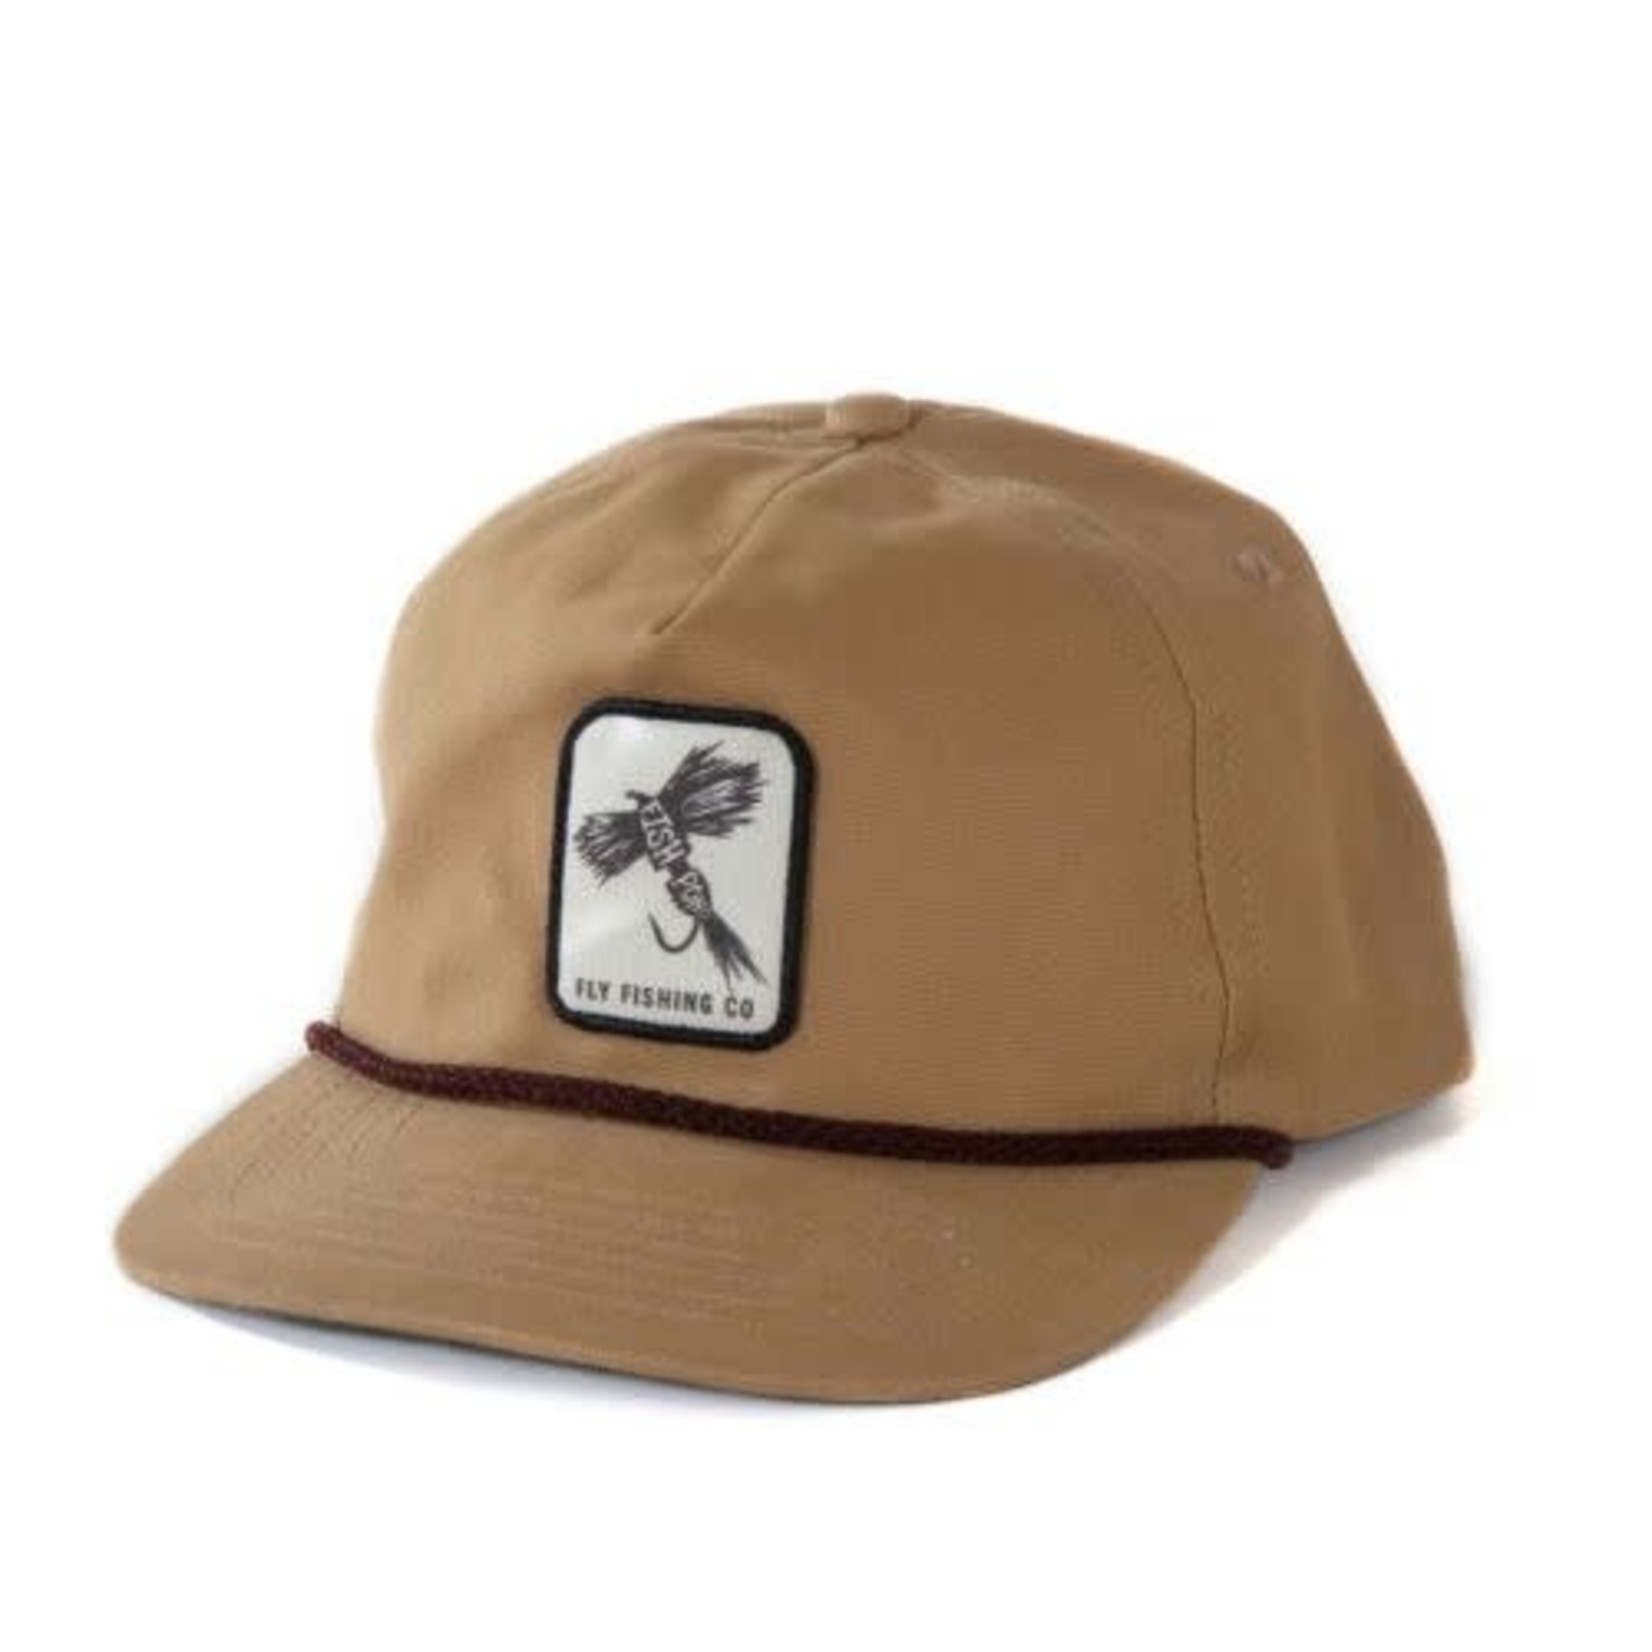 FISHPOND Fishpond High and Dry Hat